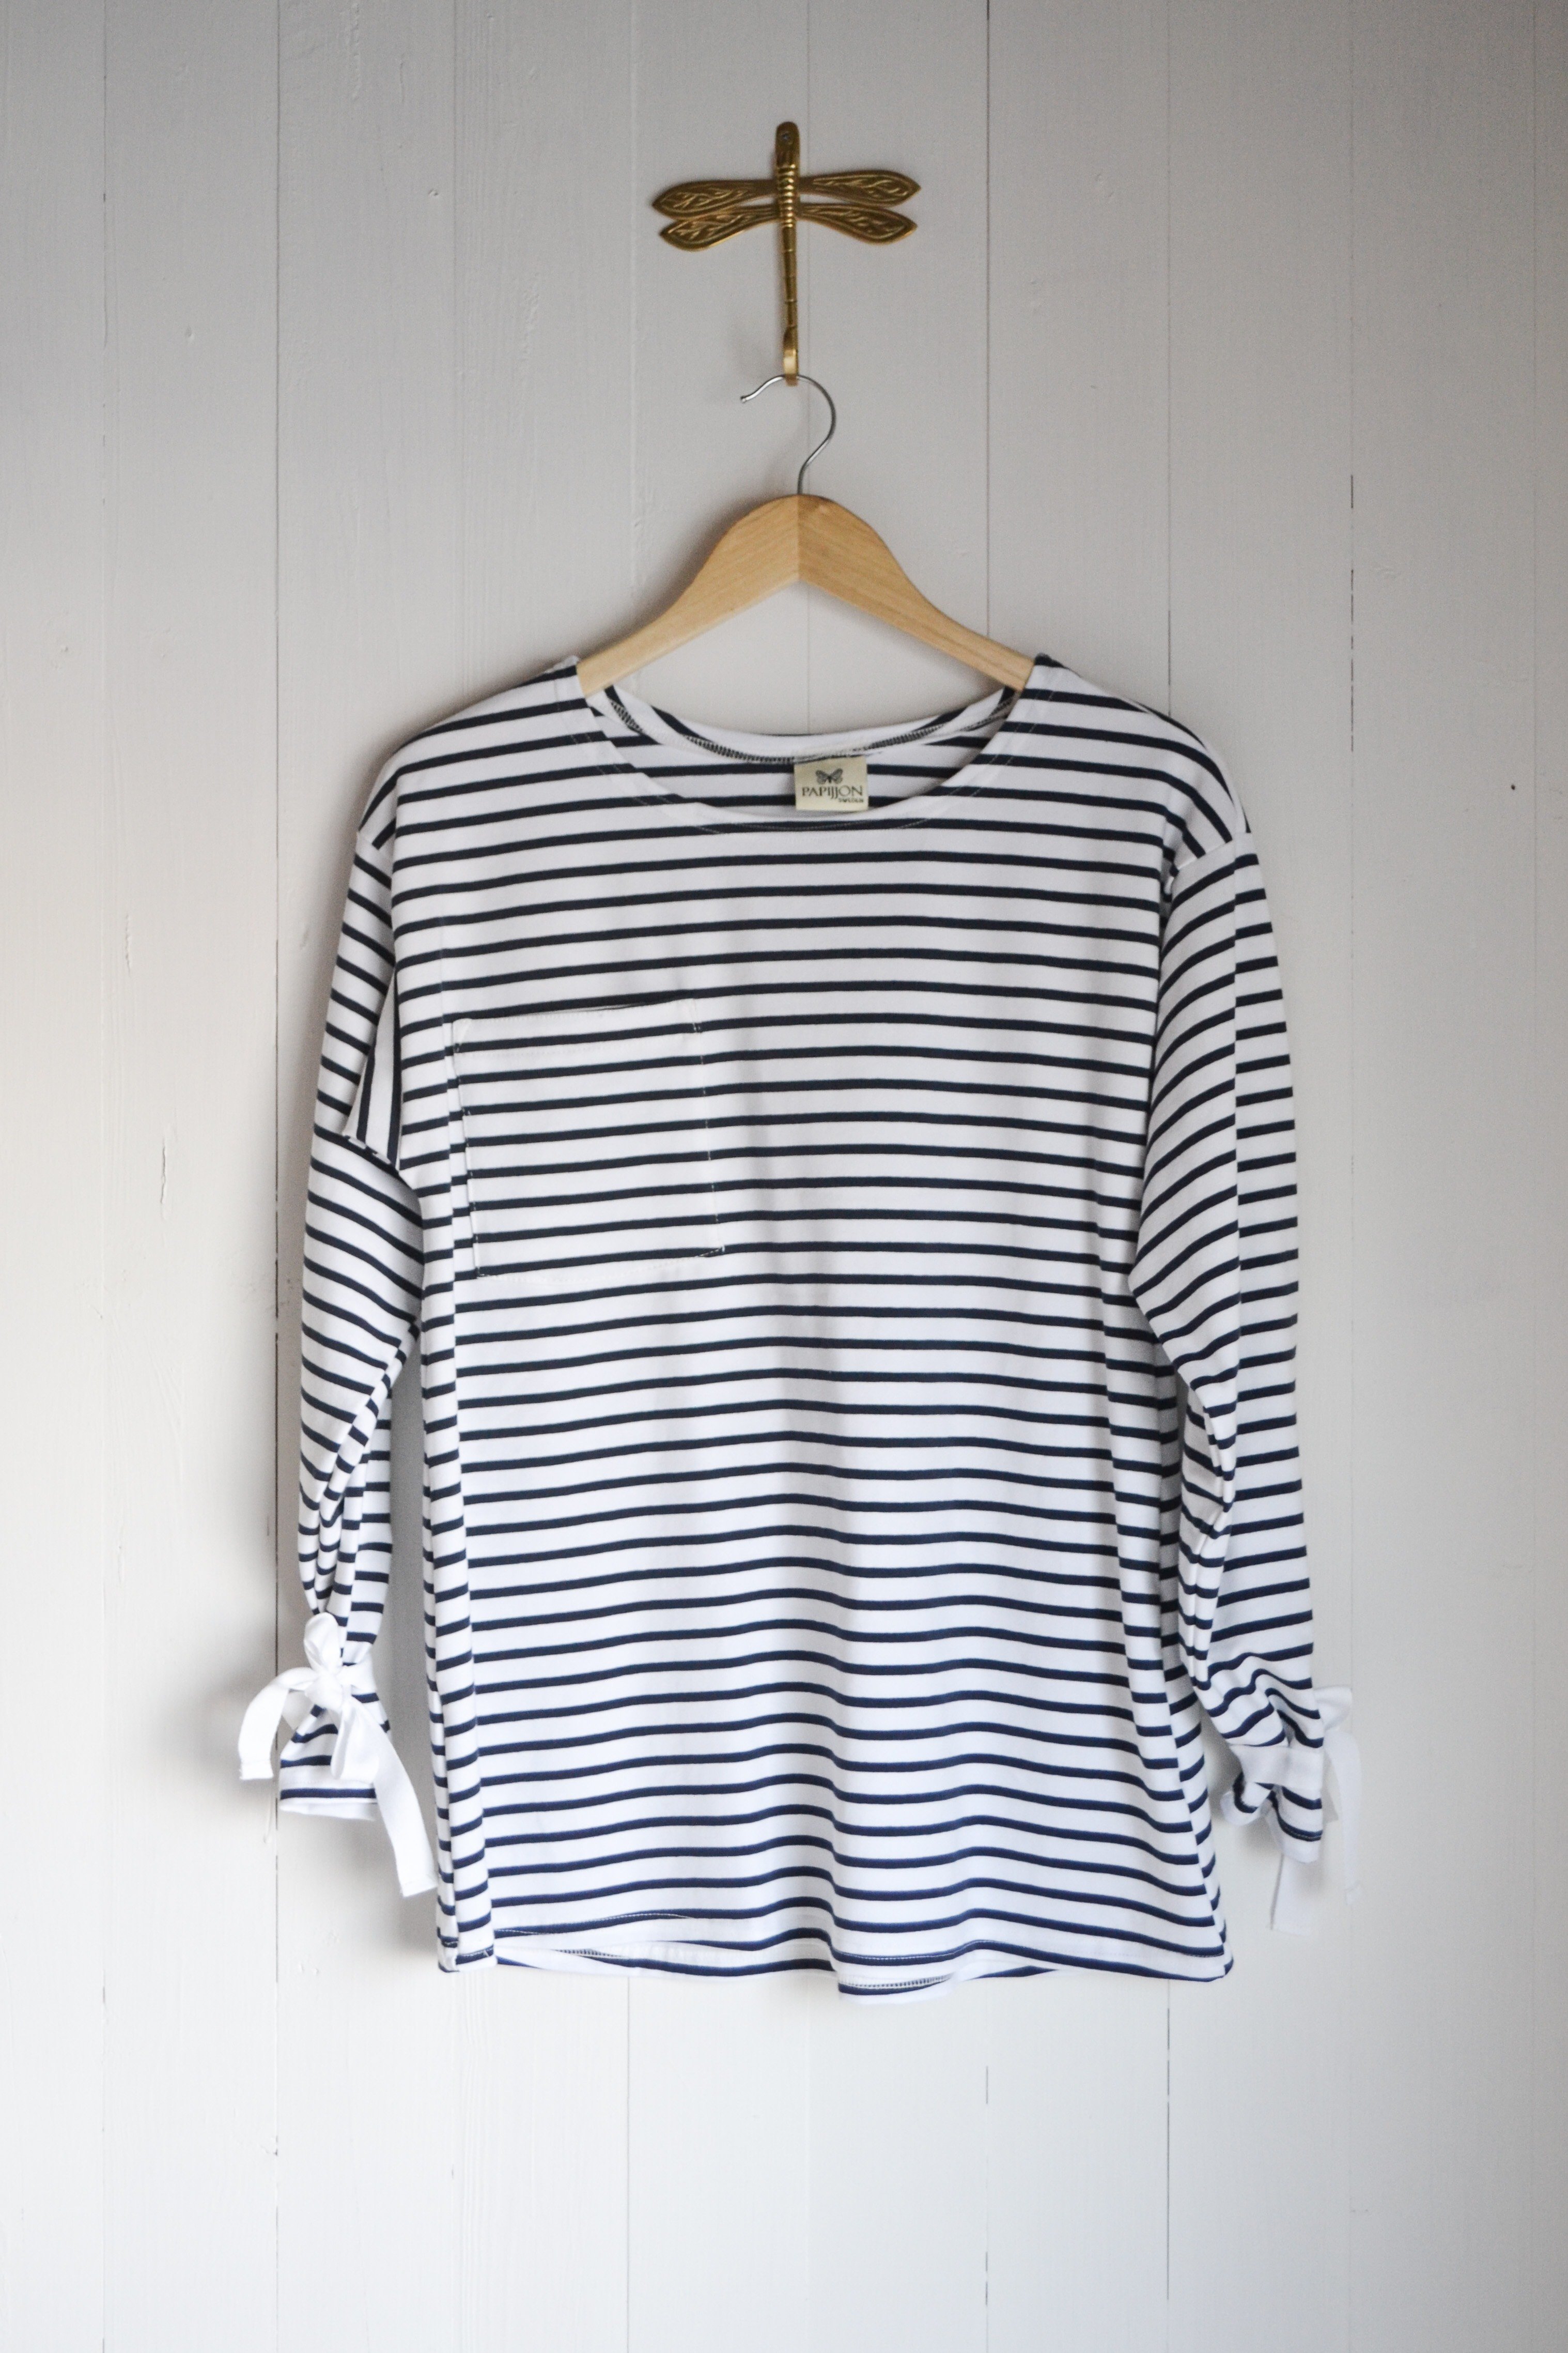 REMOVIBLE LONG SLEEVE TOP - BLUE AND WHITE STRIPES